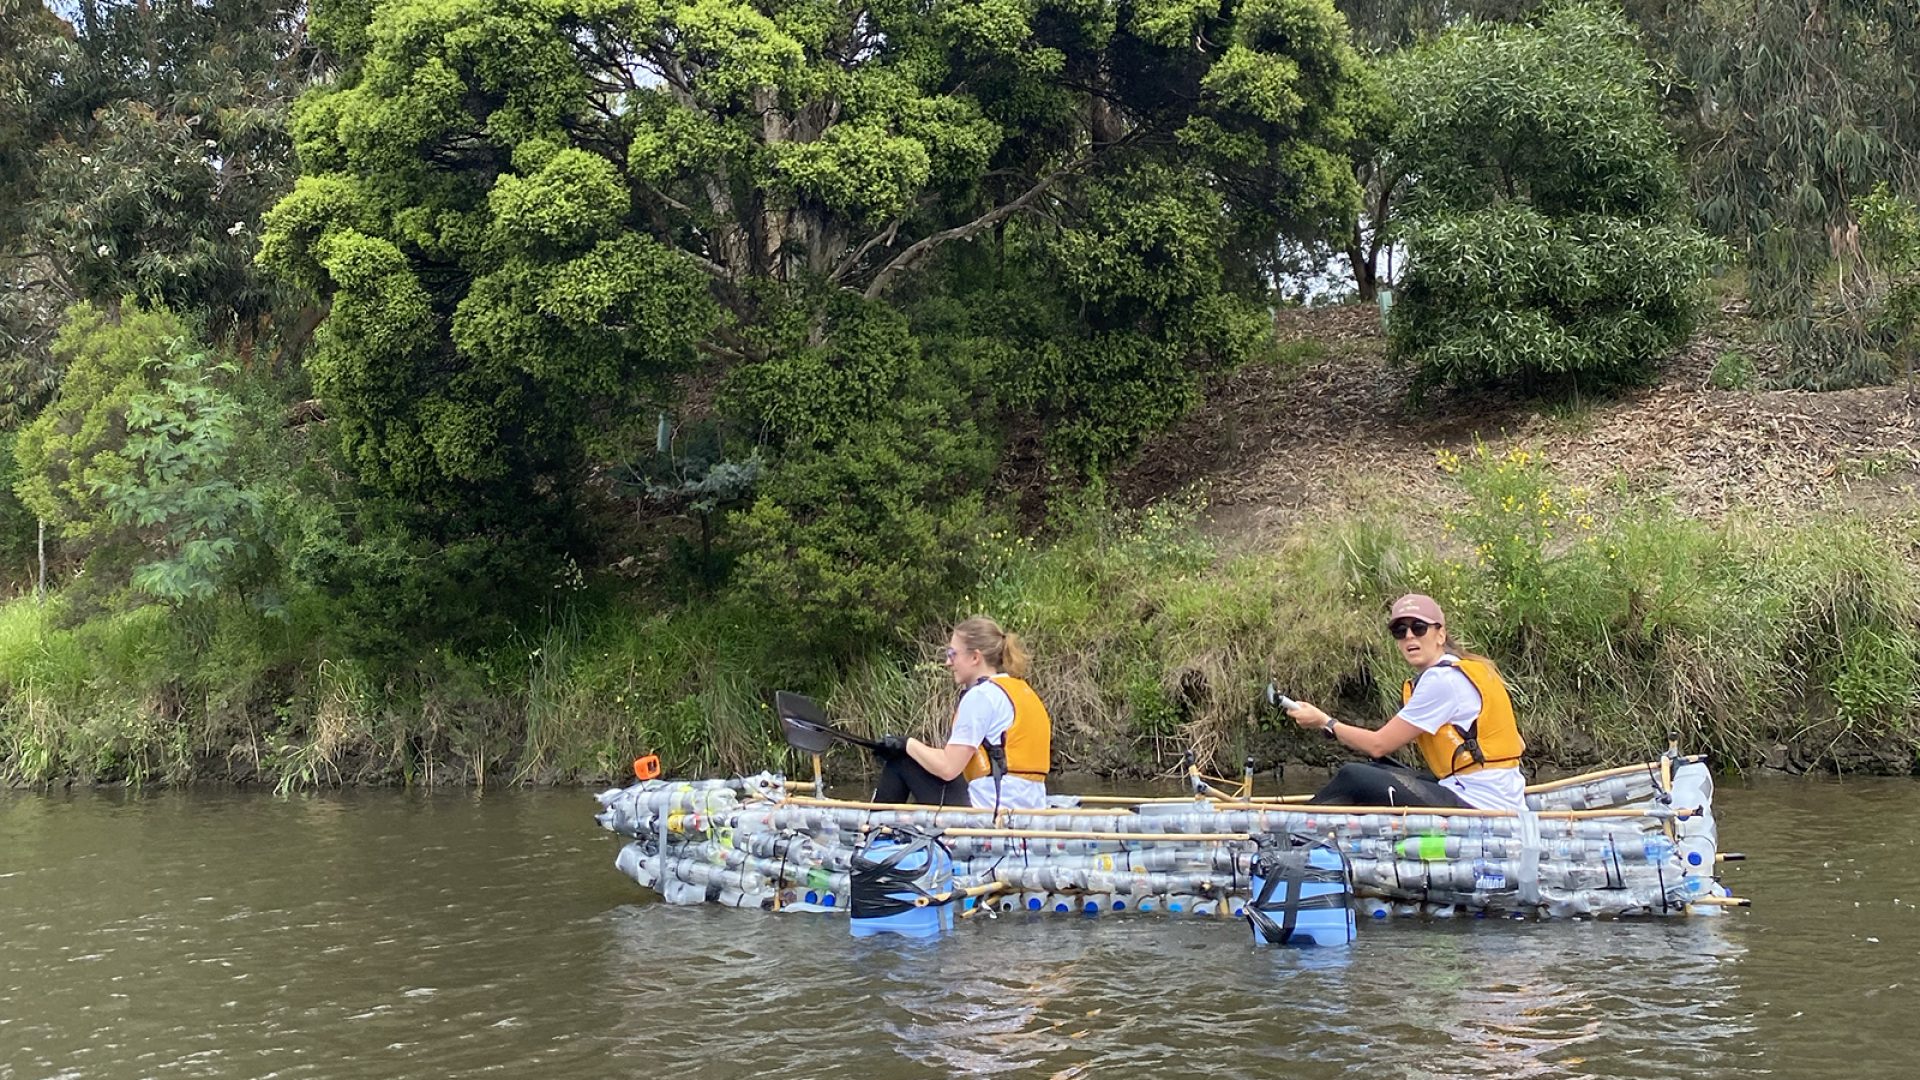 two people in orange life jackets paddle a kayak made out of plastic bottles on a river